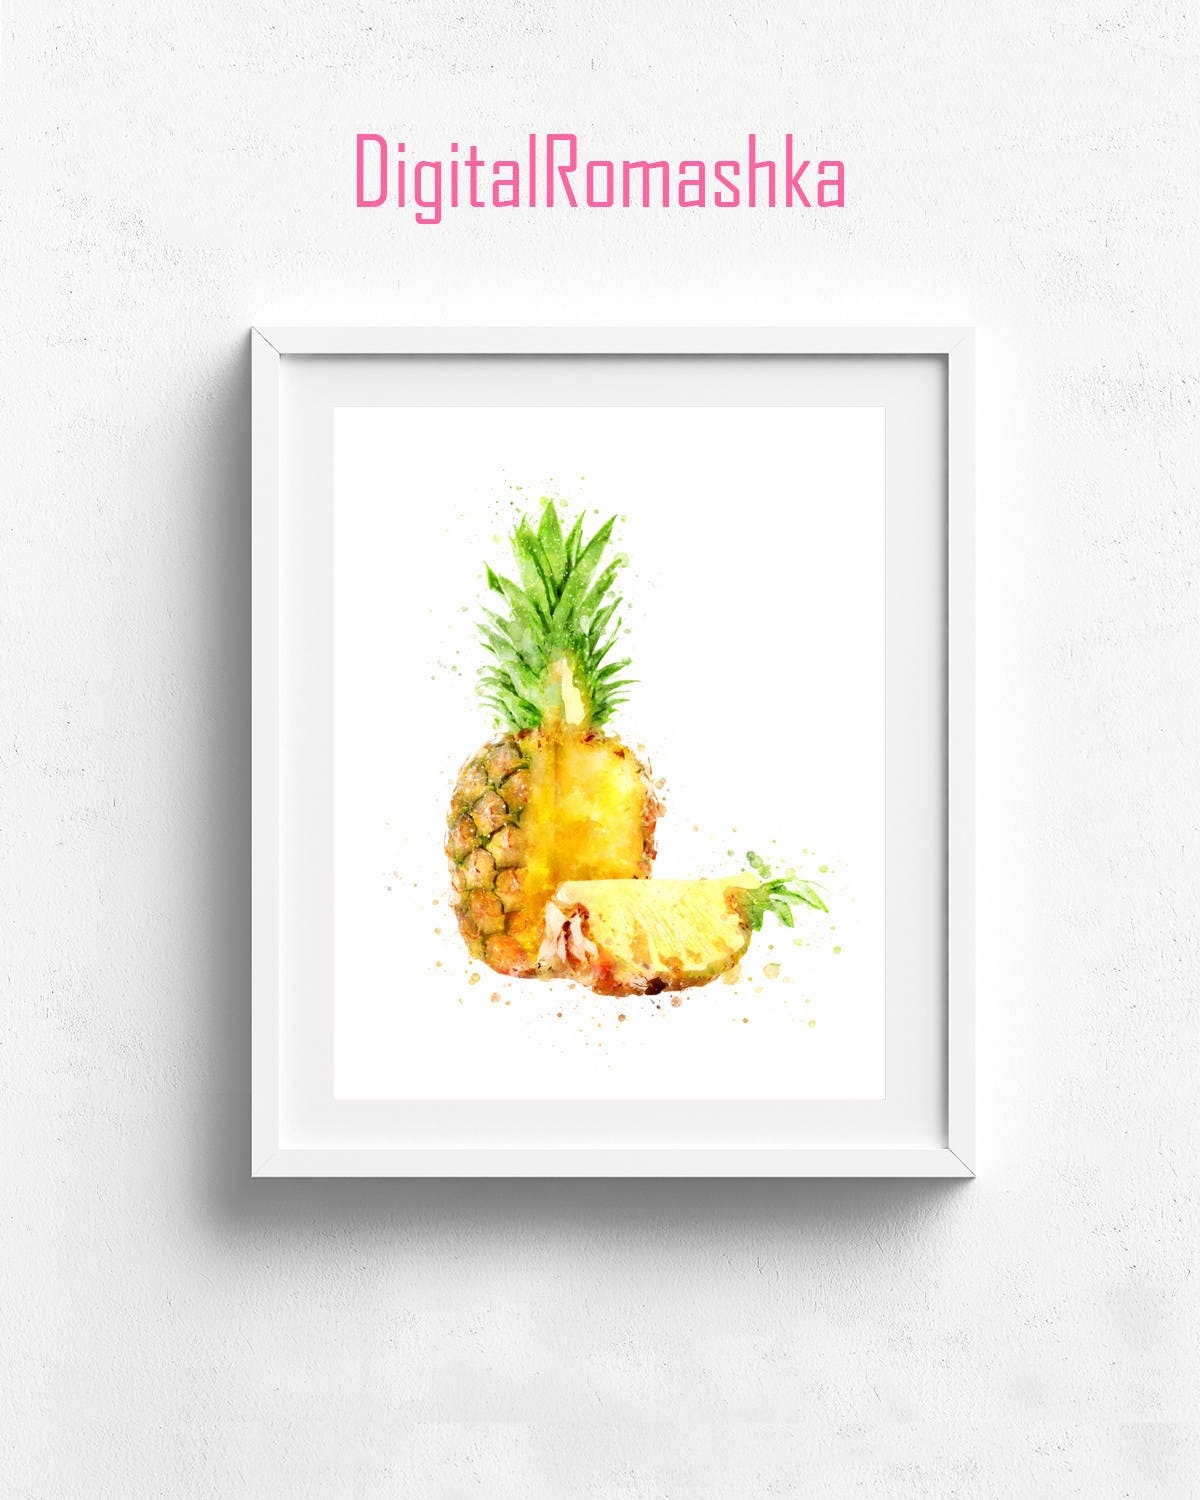 Pineapple Wall Art Pineapple Print Pineapple Decor and Awesome purple pineapple home decor you must have